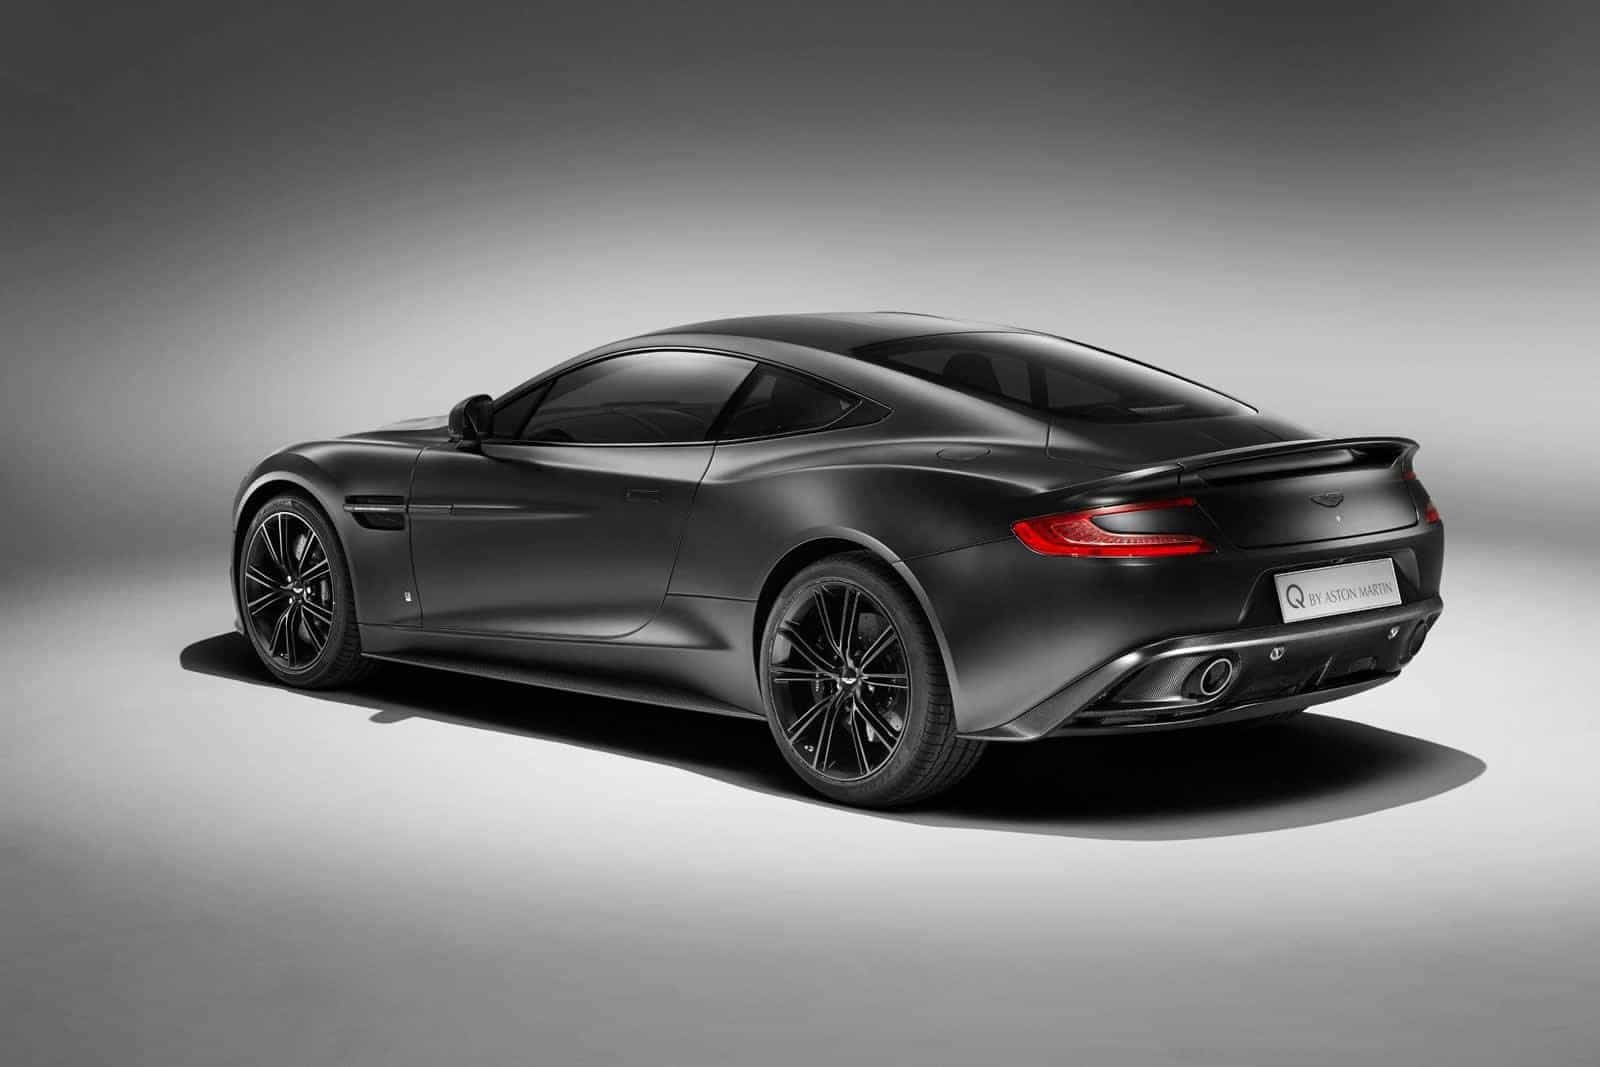 Q-by-Aston-Martin-Special-Edition-Vanquish-Coupe 2